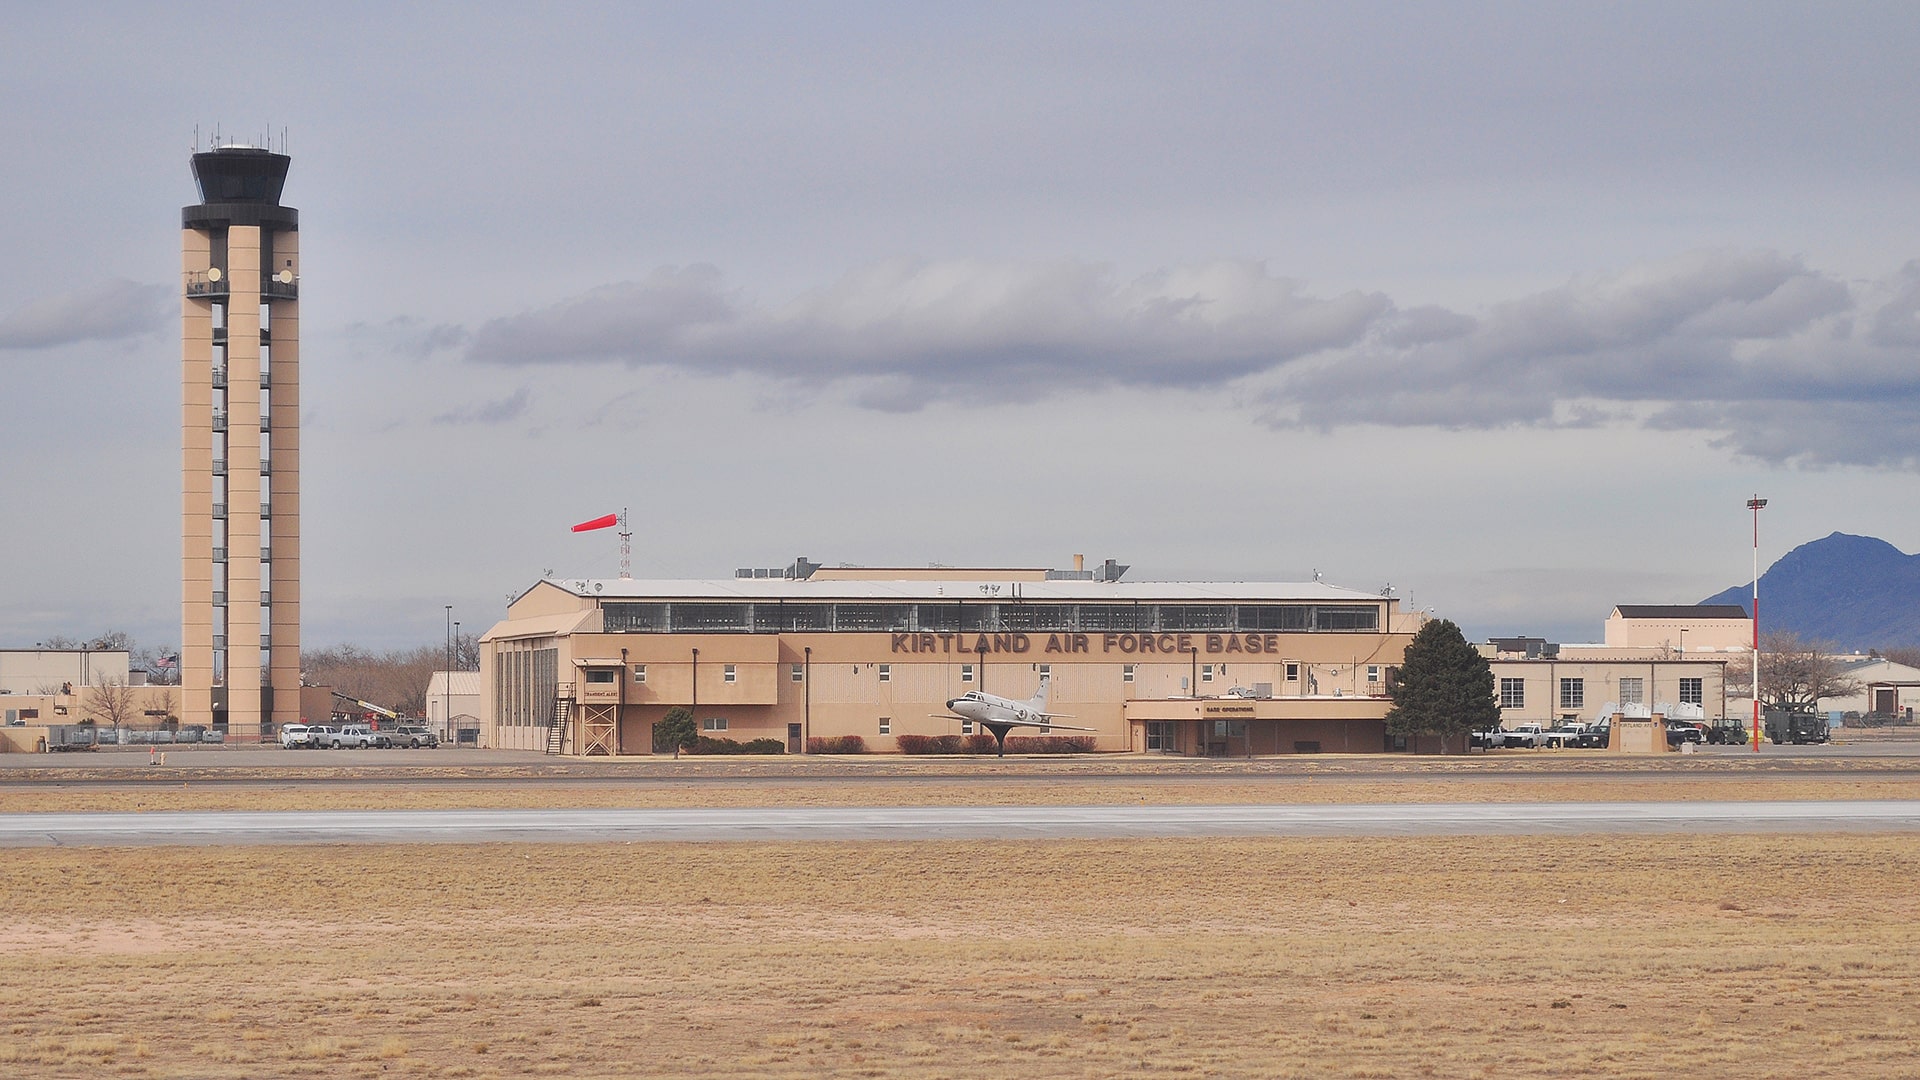 Kirtland Air Force Base, Albuquerque, New Mexico, U.S. Joel Mabel, Wiki Commons.